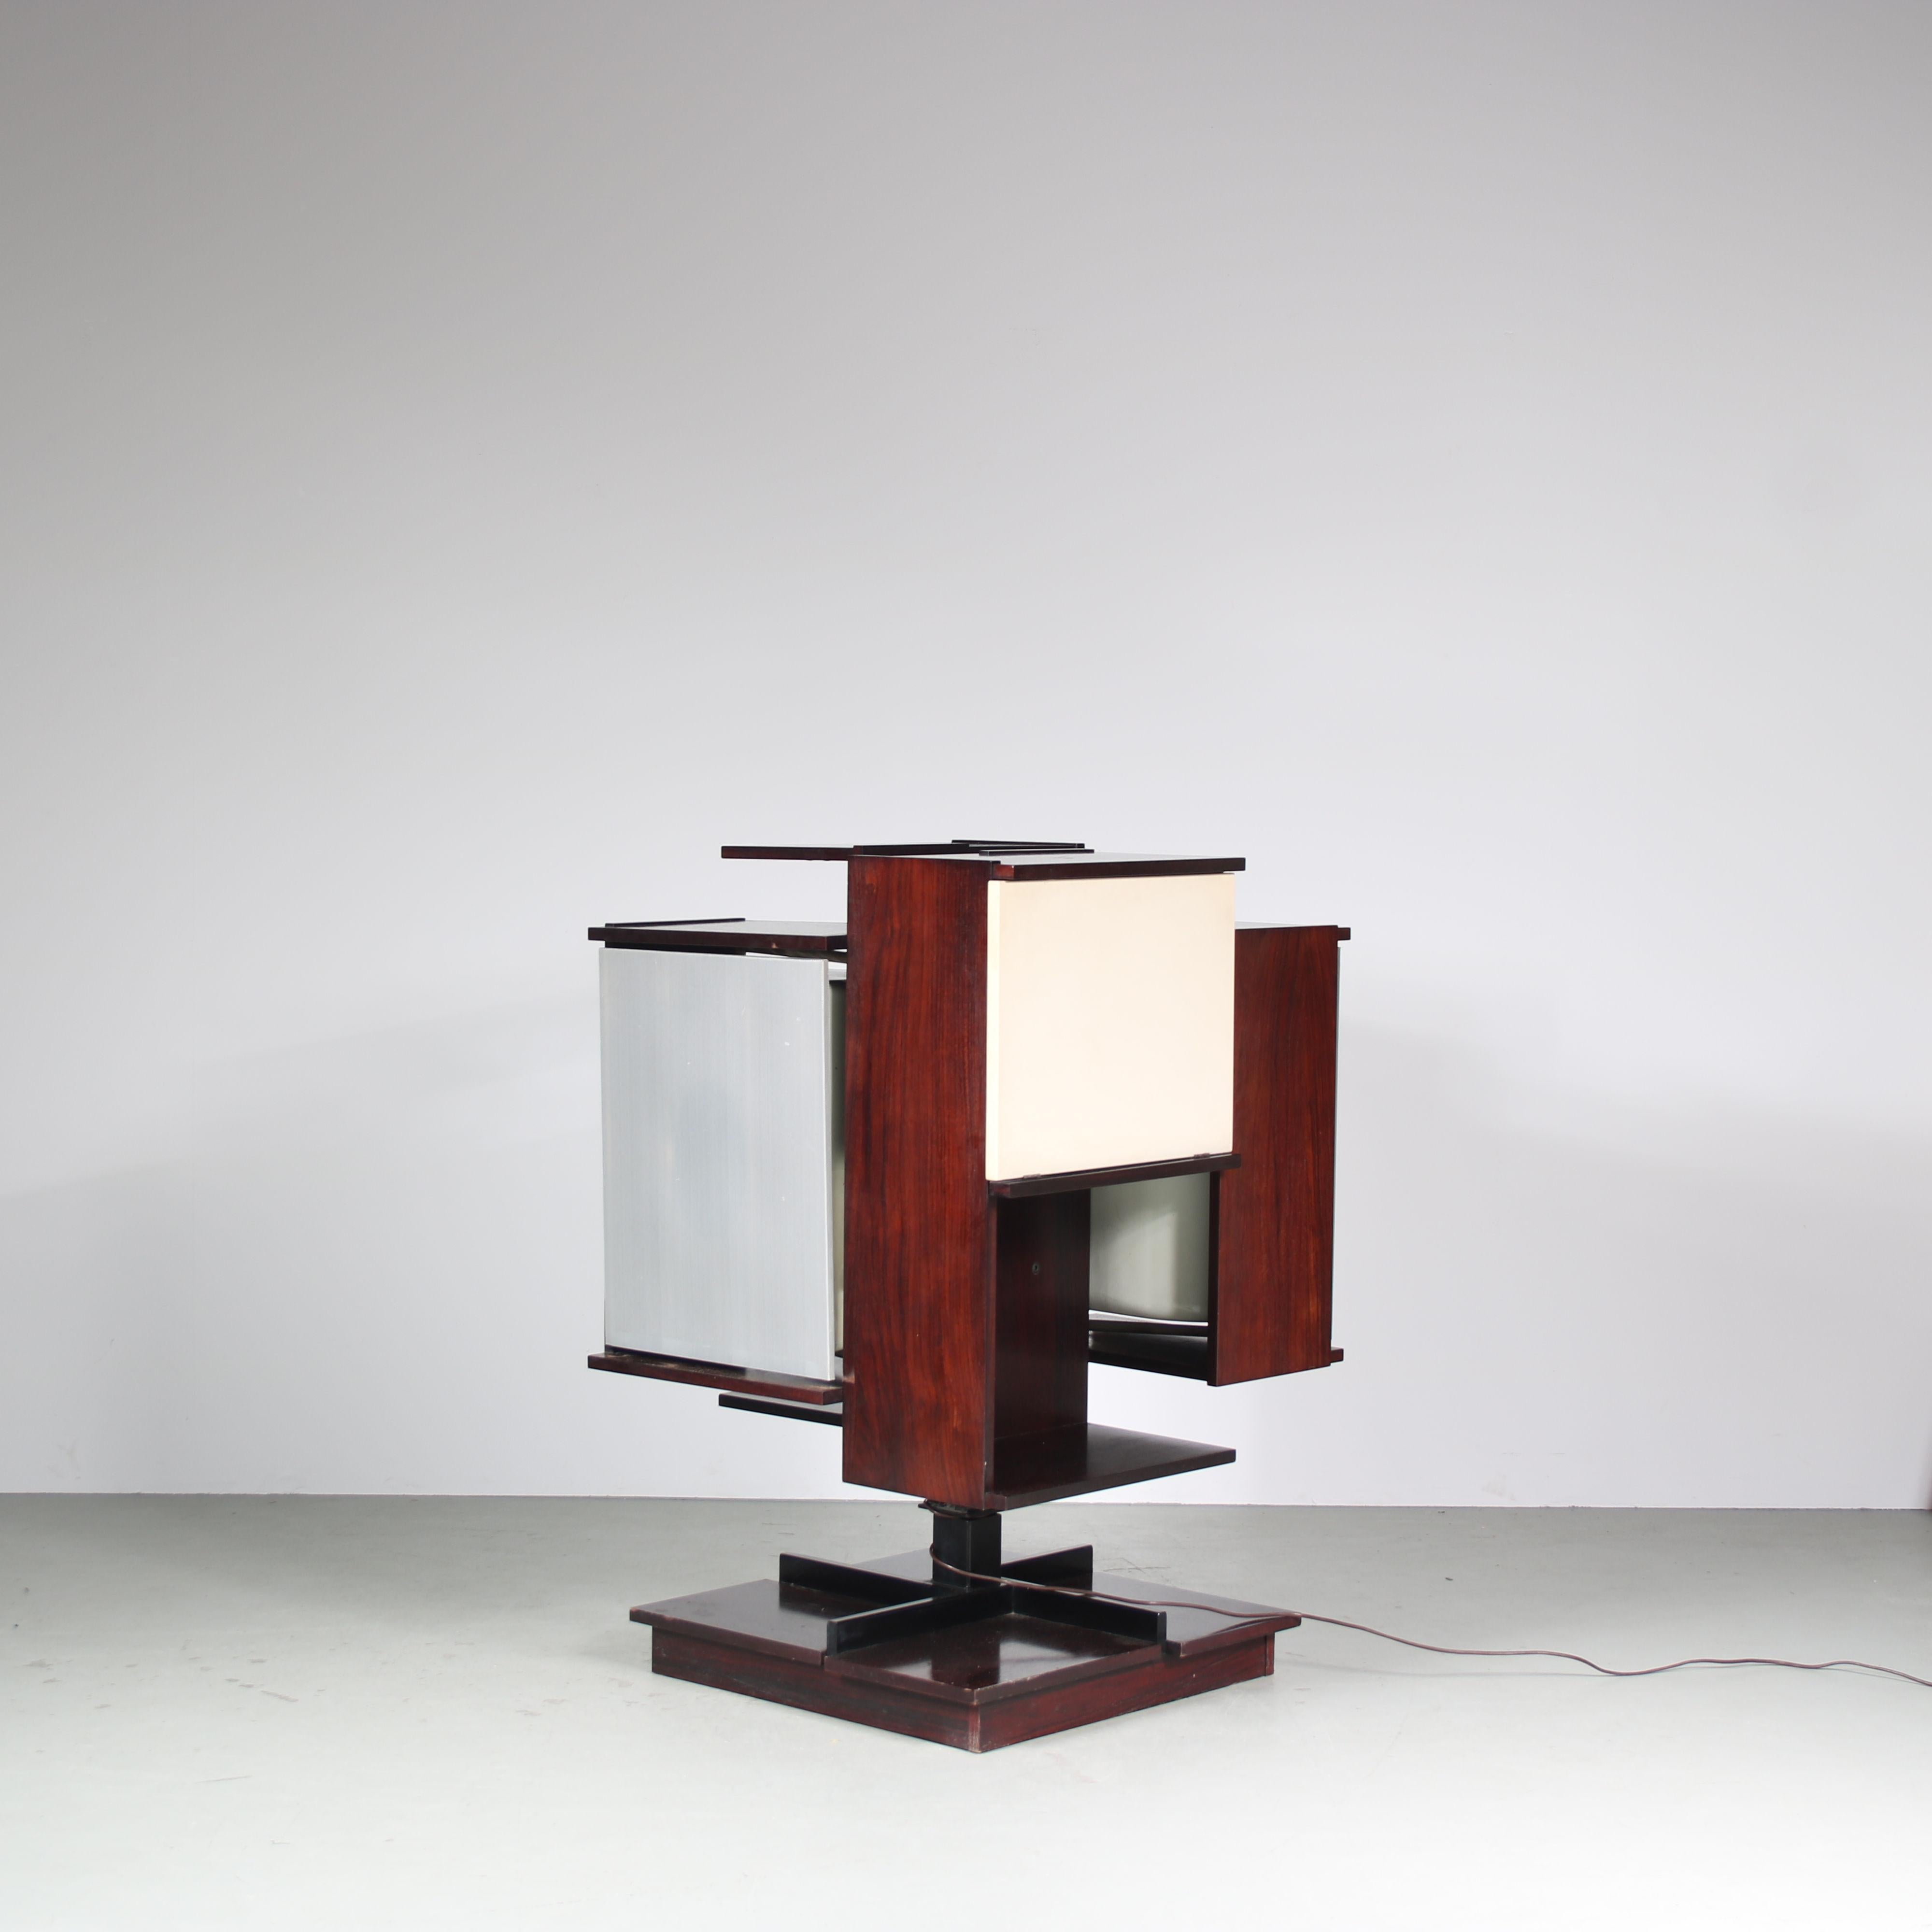 A fantastic HiFi cabinet designed by Claudio Salocchi, manufactured by Sormani in Italy around 1960.

This beautiful and rare piece is made of high quality rosewood with one door being white laminated. It  stands on a swivel base and the doors